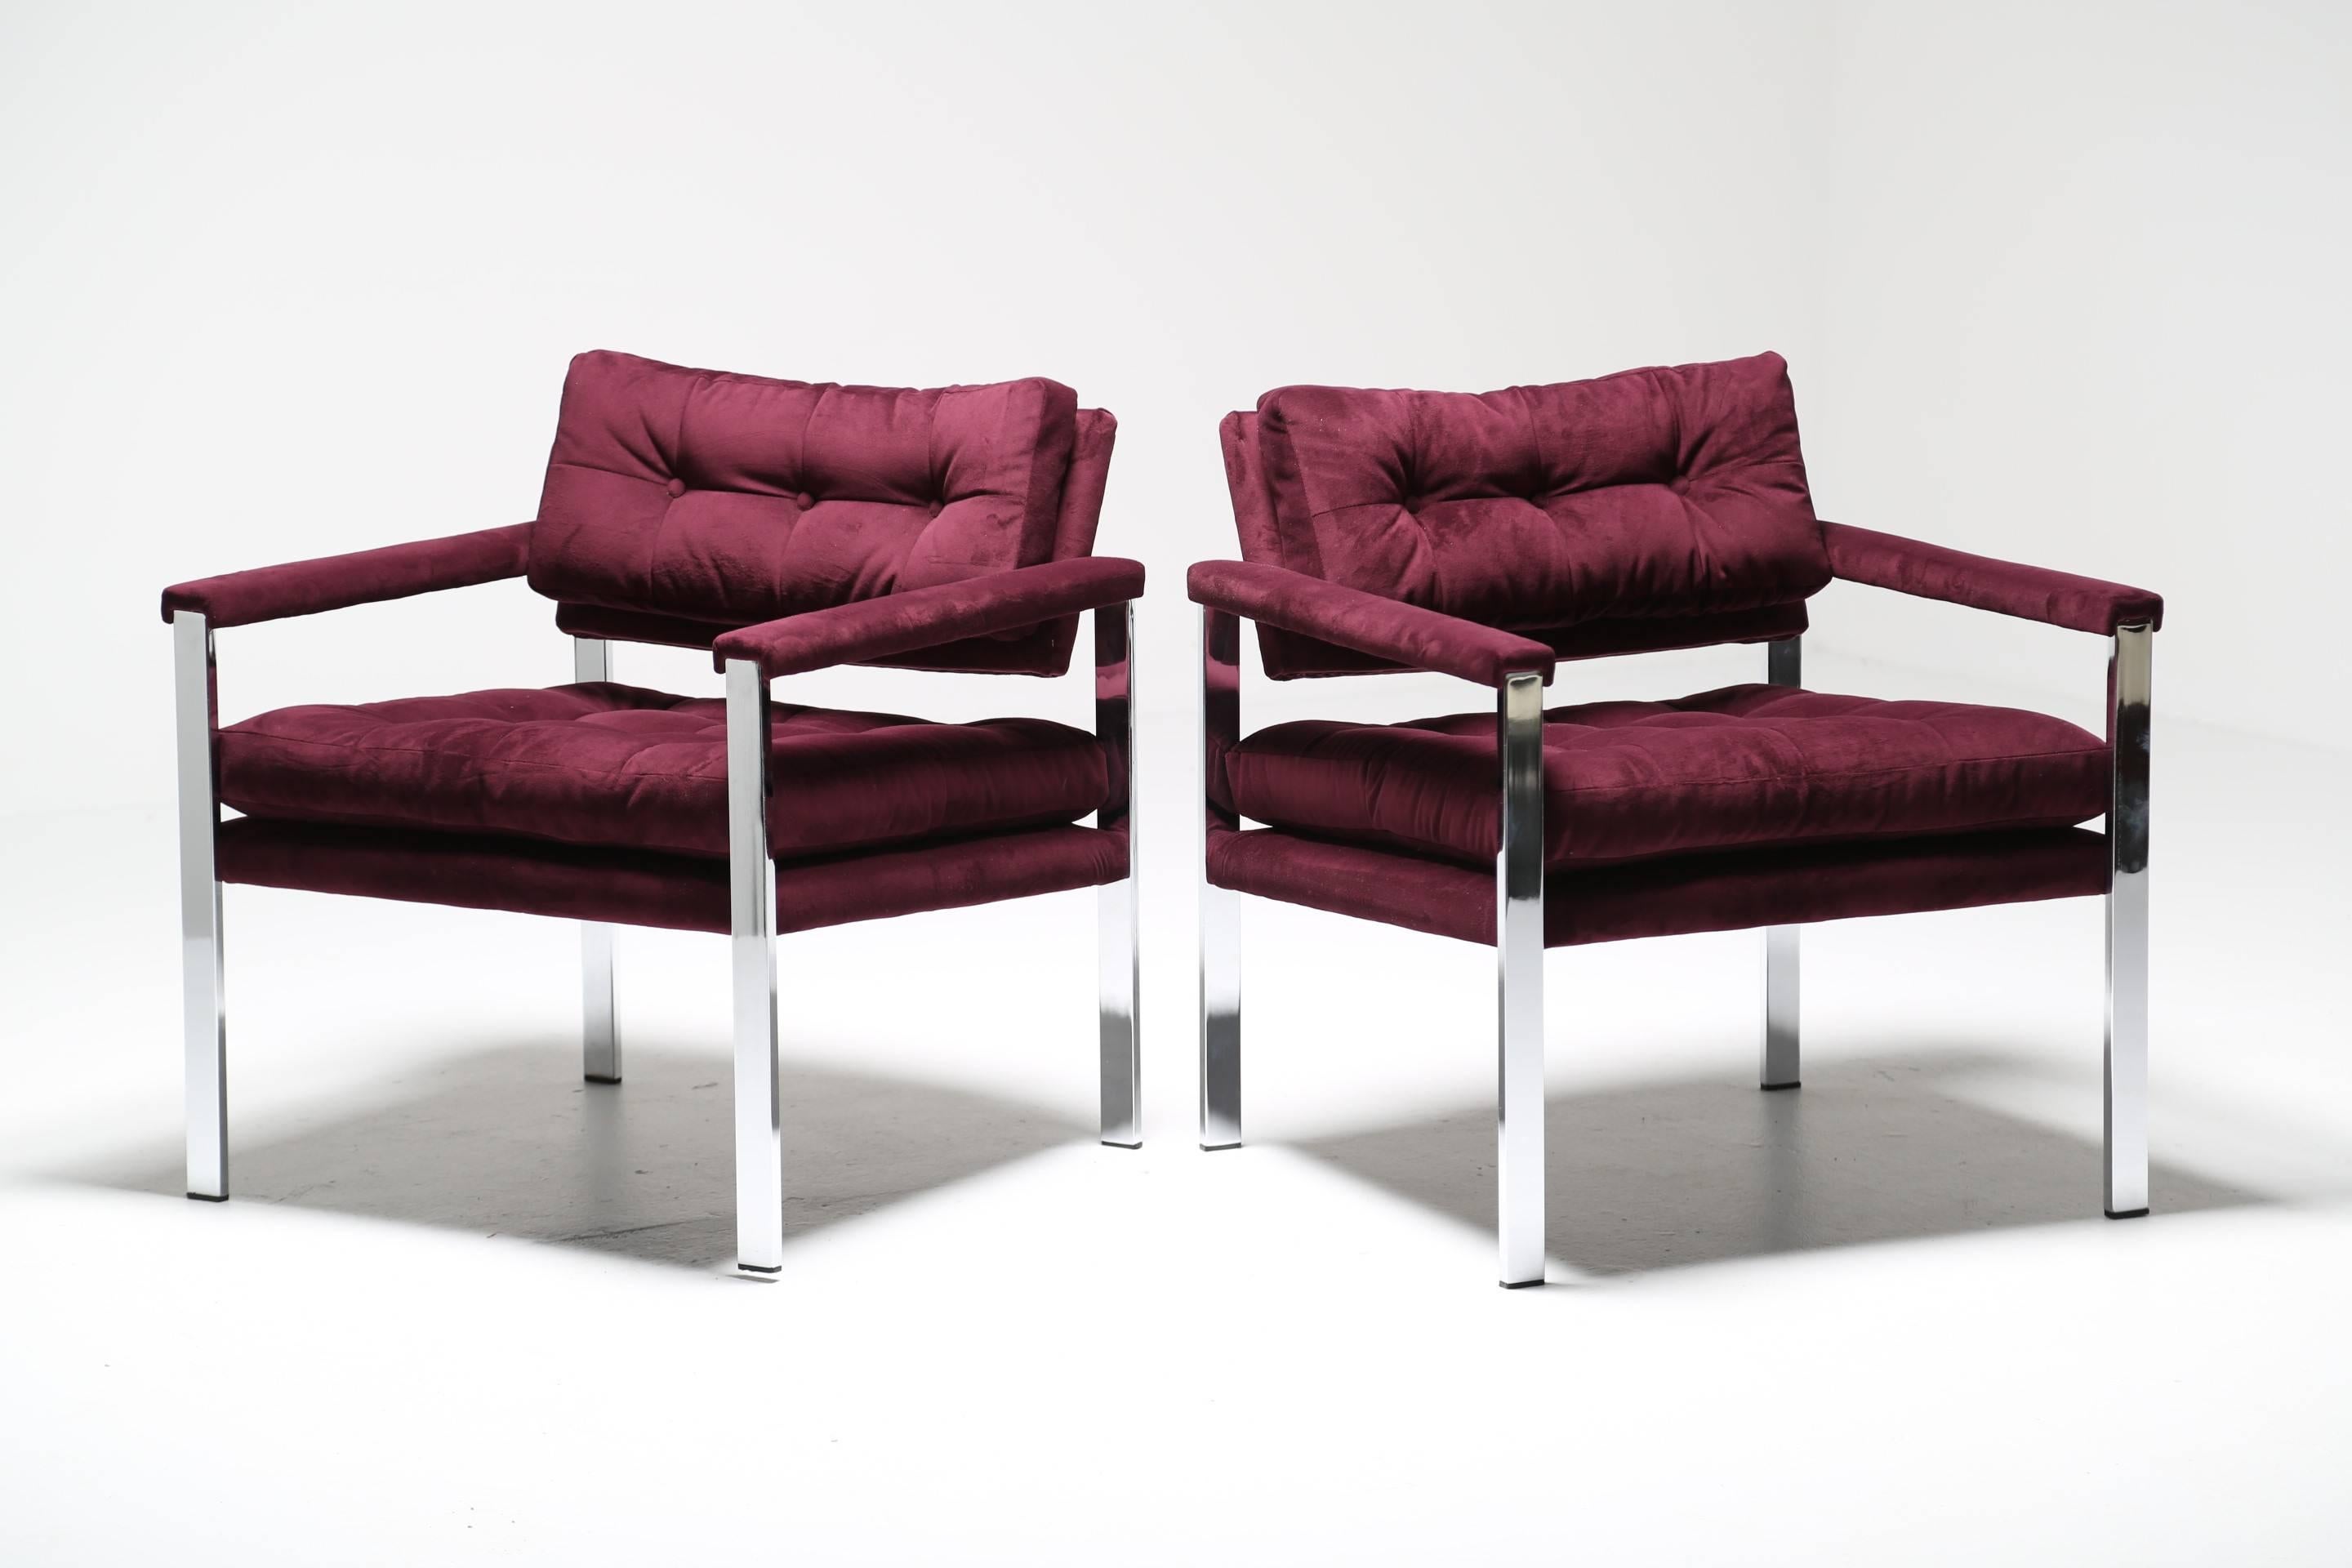 A pair of chrome frame lounge chairs recovered in a purple velvet, manufactured by Selig. A nice soft cushioned seat that makes for a very comfortable chair to sit in. The seat cushions are attached to the frame. The chairs have original paper